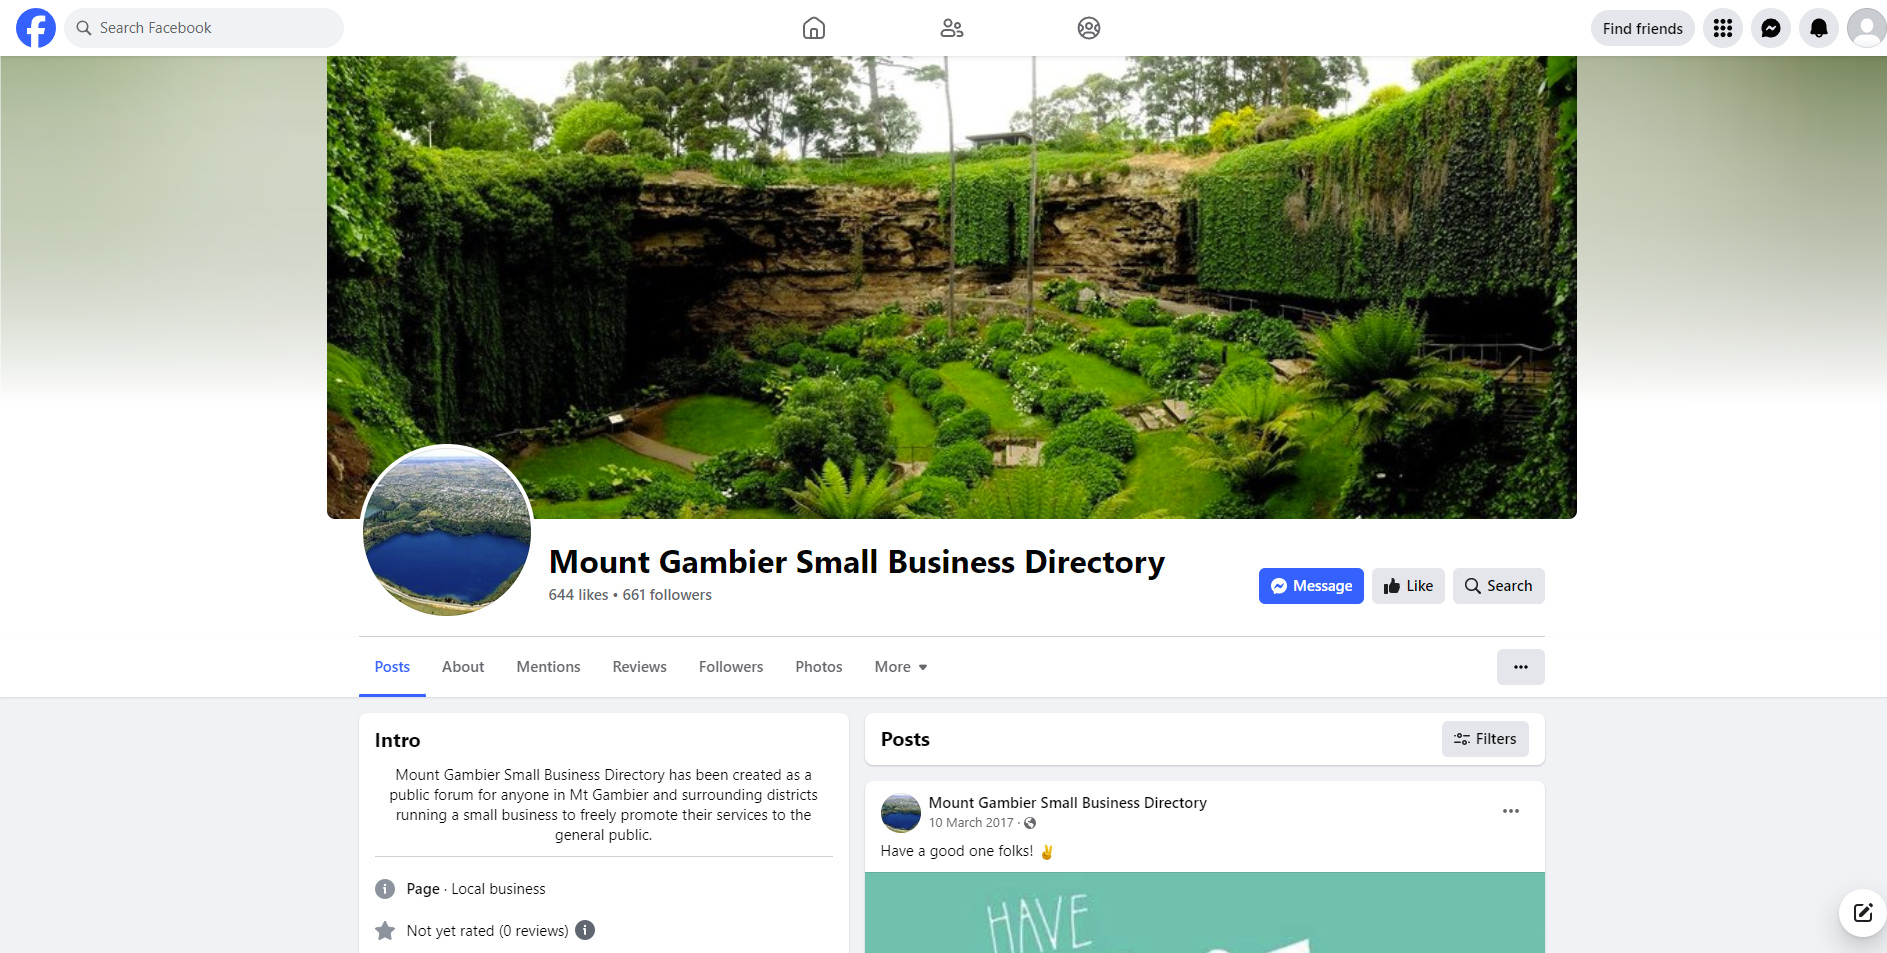 Mount Gambier Small Business Directory